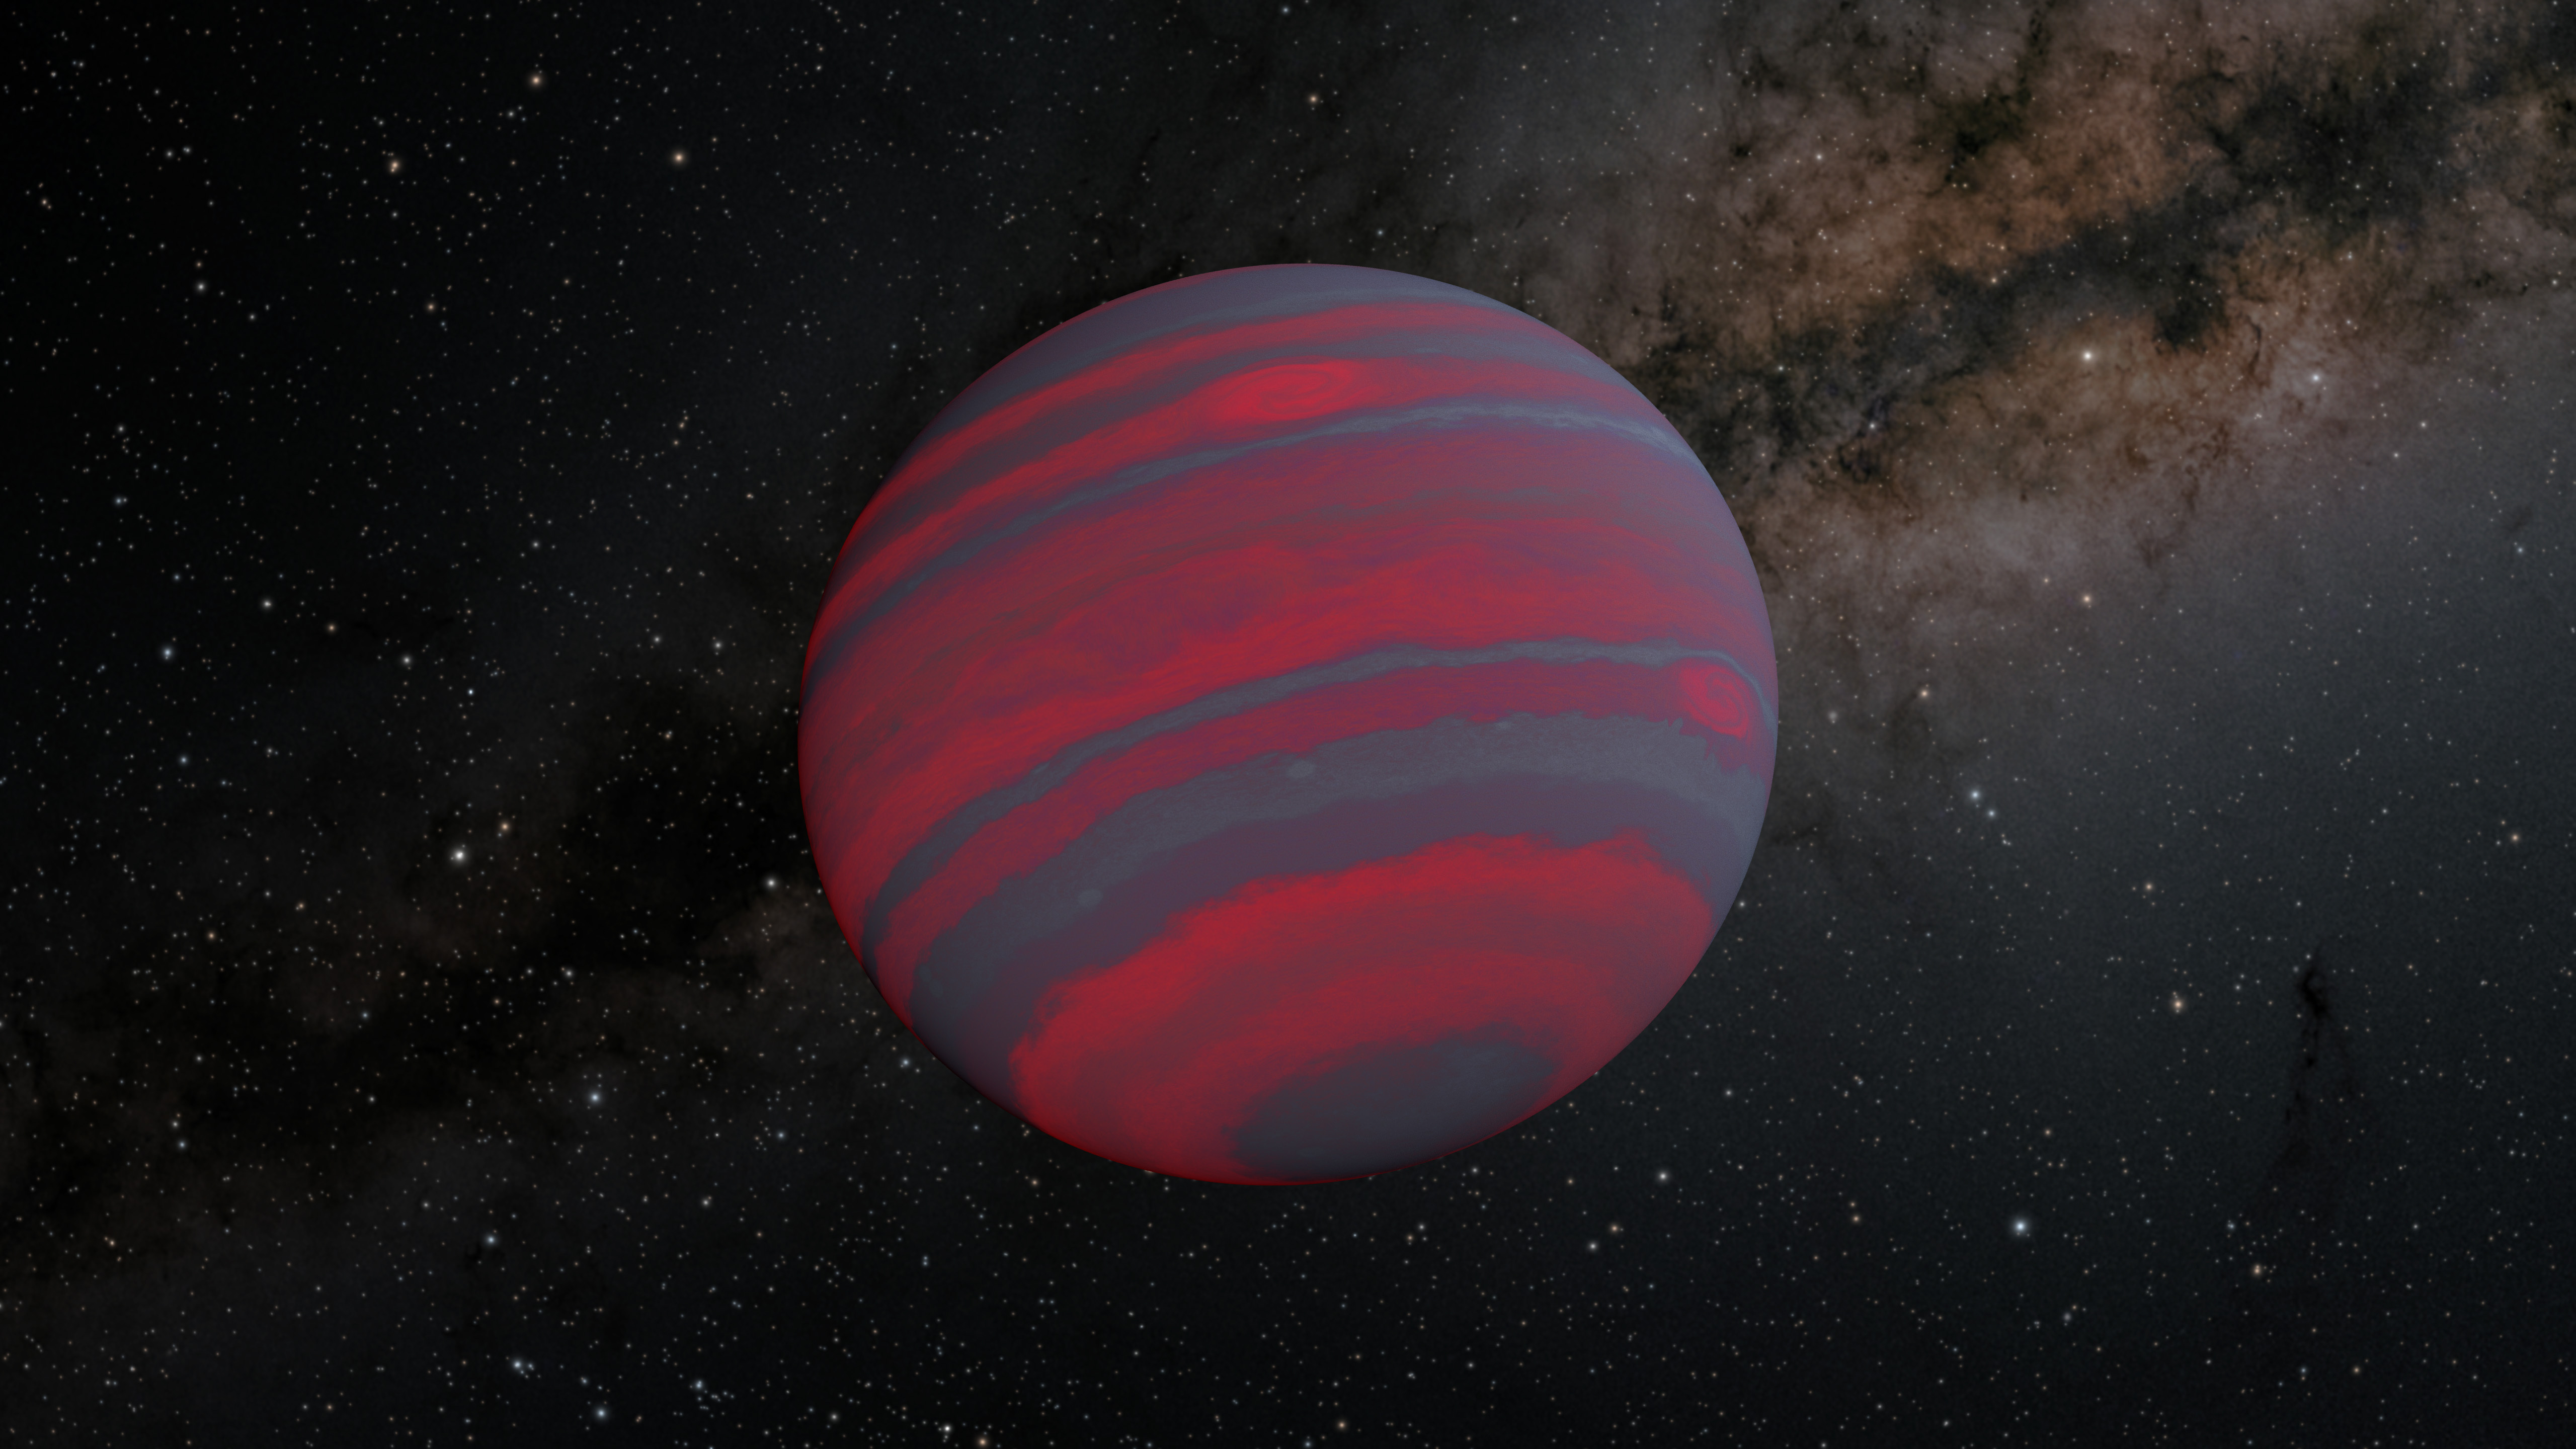 Artist rendering of a fast spinning brown dwarf